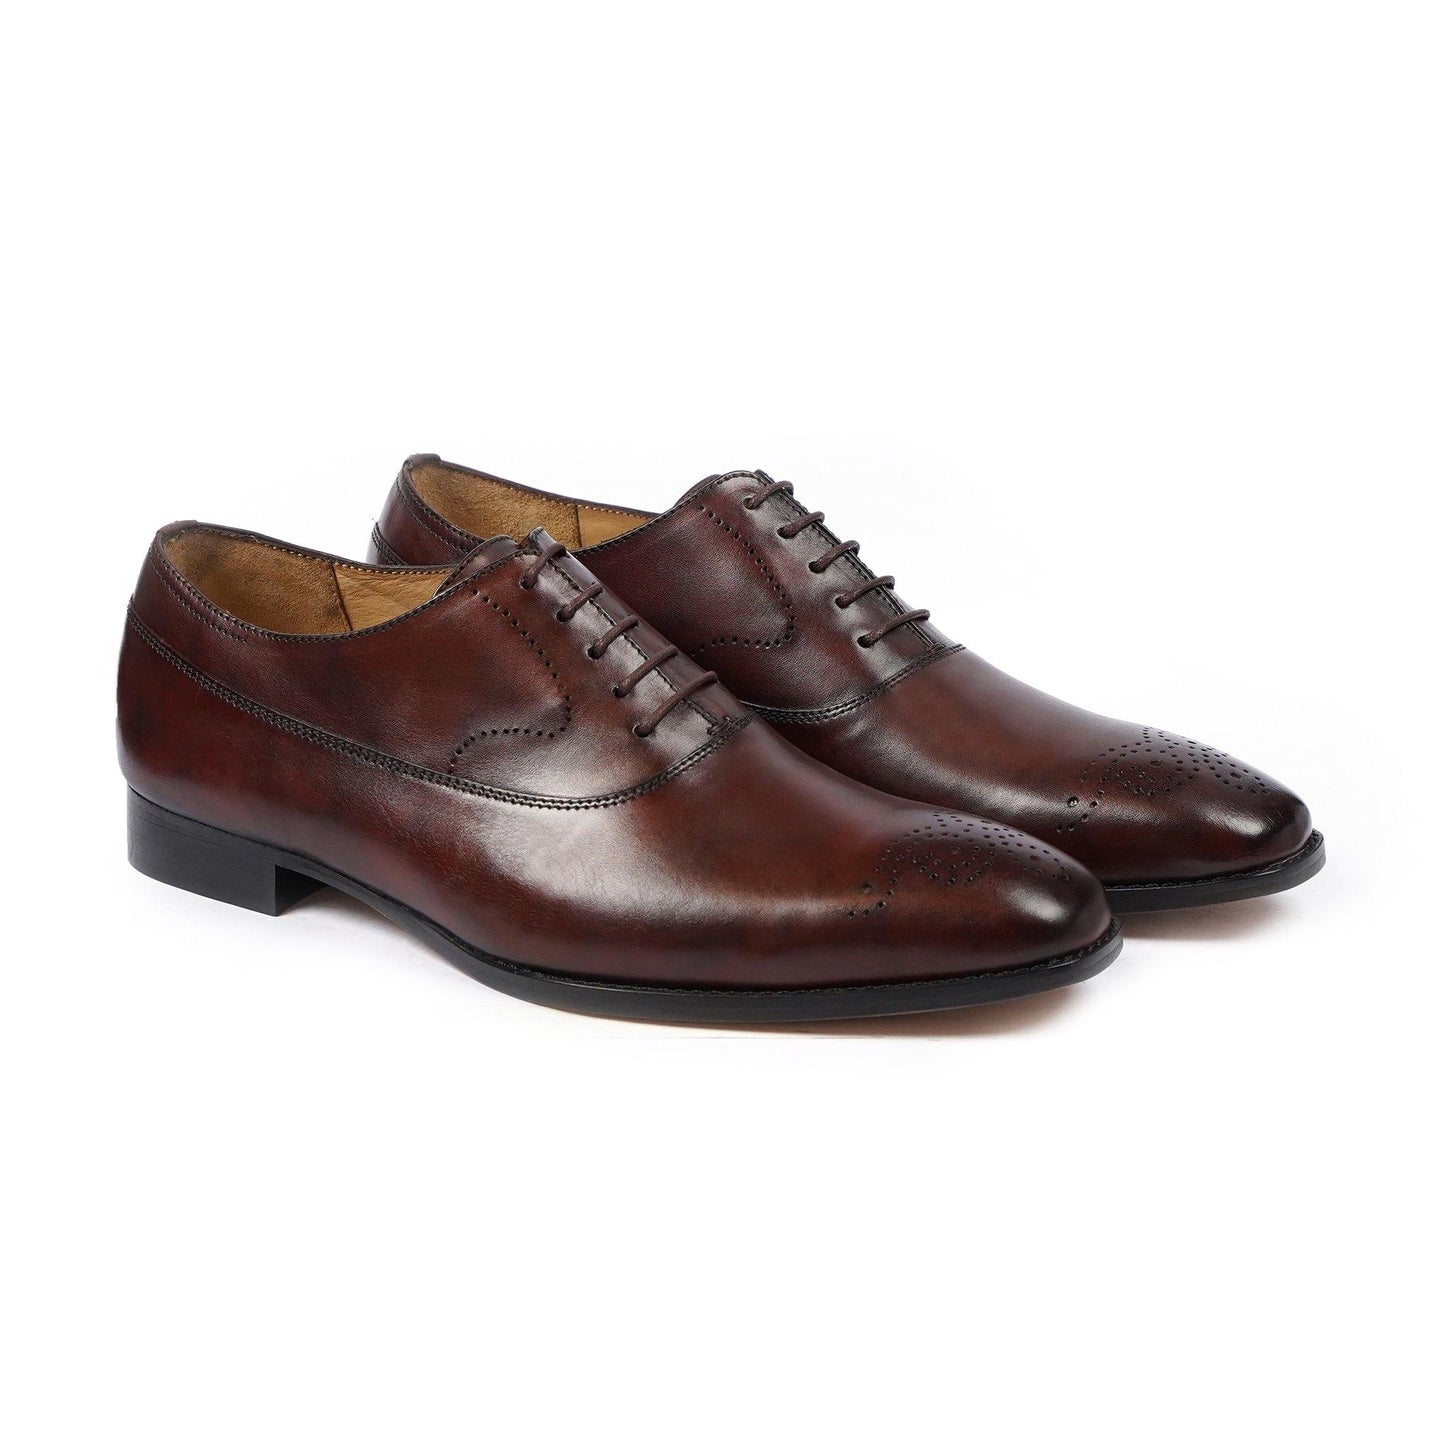 Oxford Shoes Men | Men's Oxfords & Derby Shoes |  Men's Dress Shoes & Oxfords GOMILA(MADE TO ORDER)_OXFORD, Leather Boots